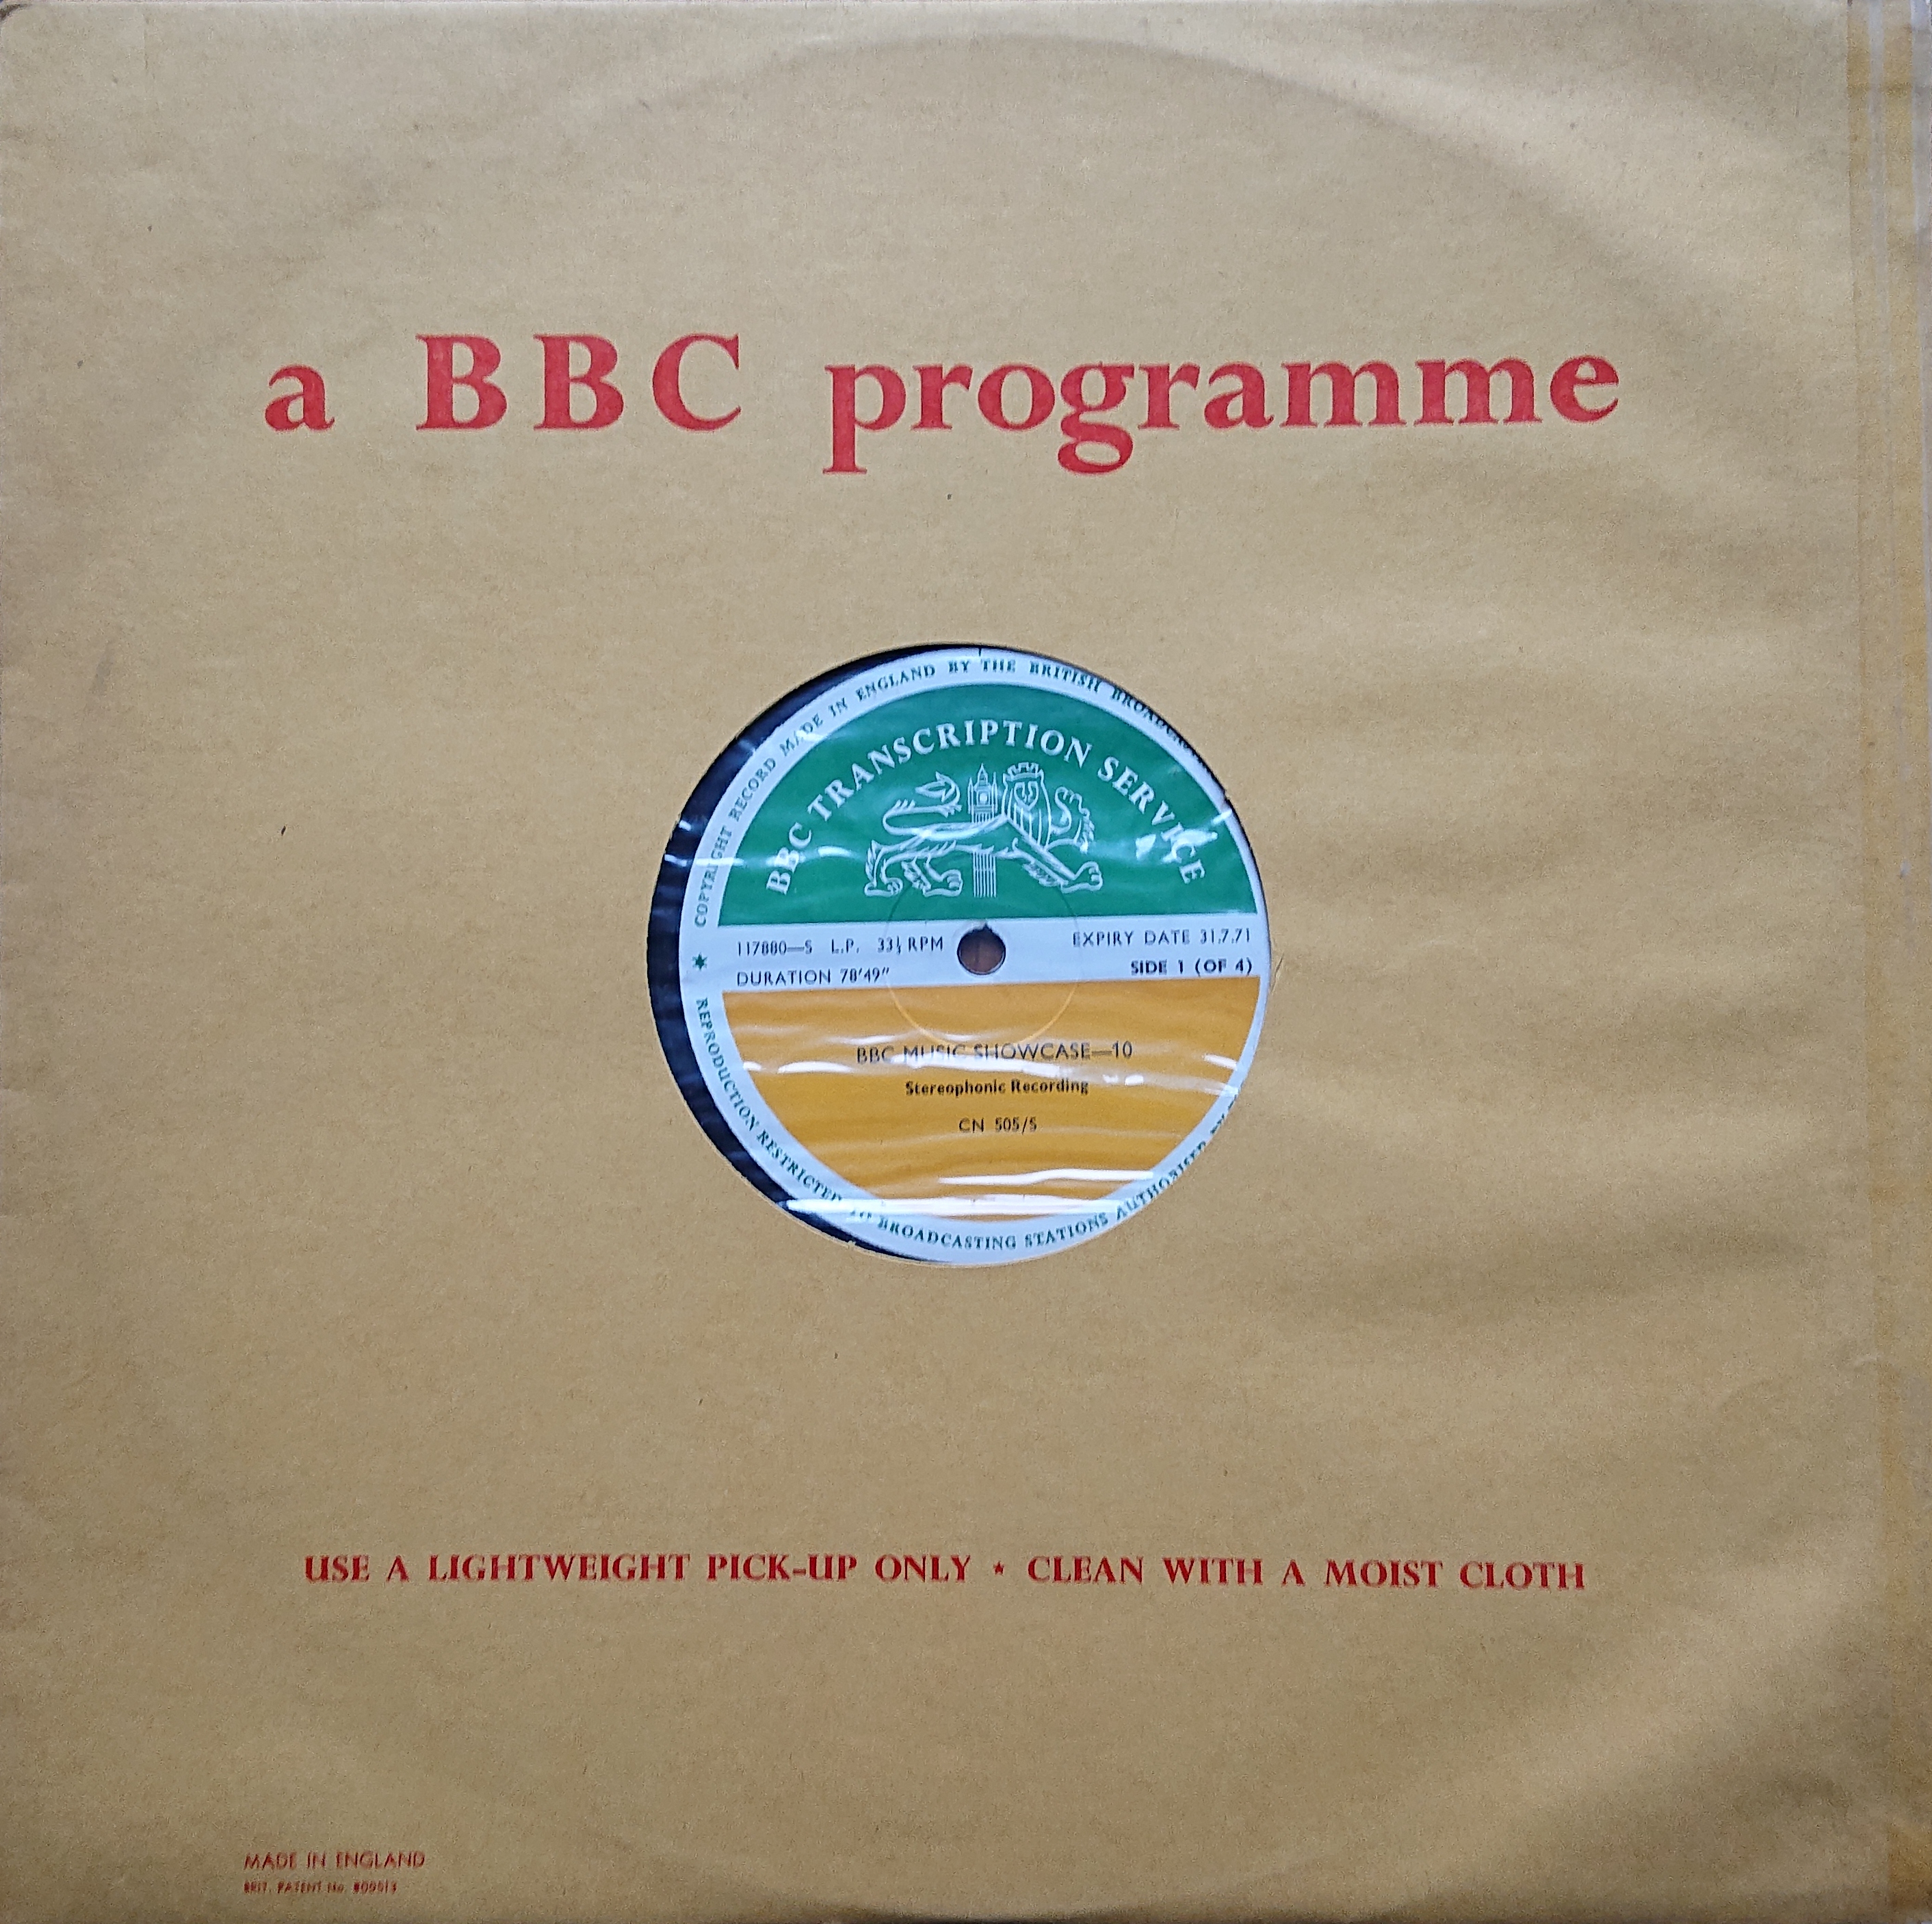 Picture of CN 505 S 19 BBC music showcase - 10 (Sides 1 & 3) by artist Various from the BBC albums - Records and Tapes library